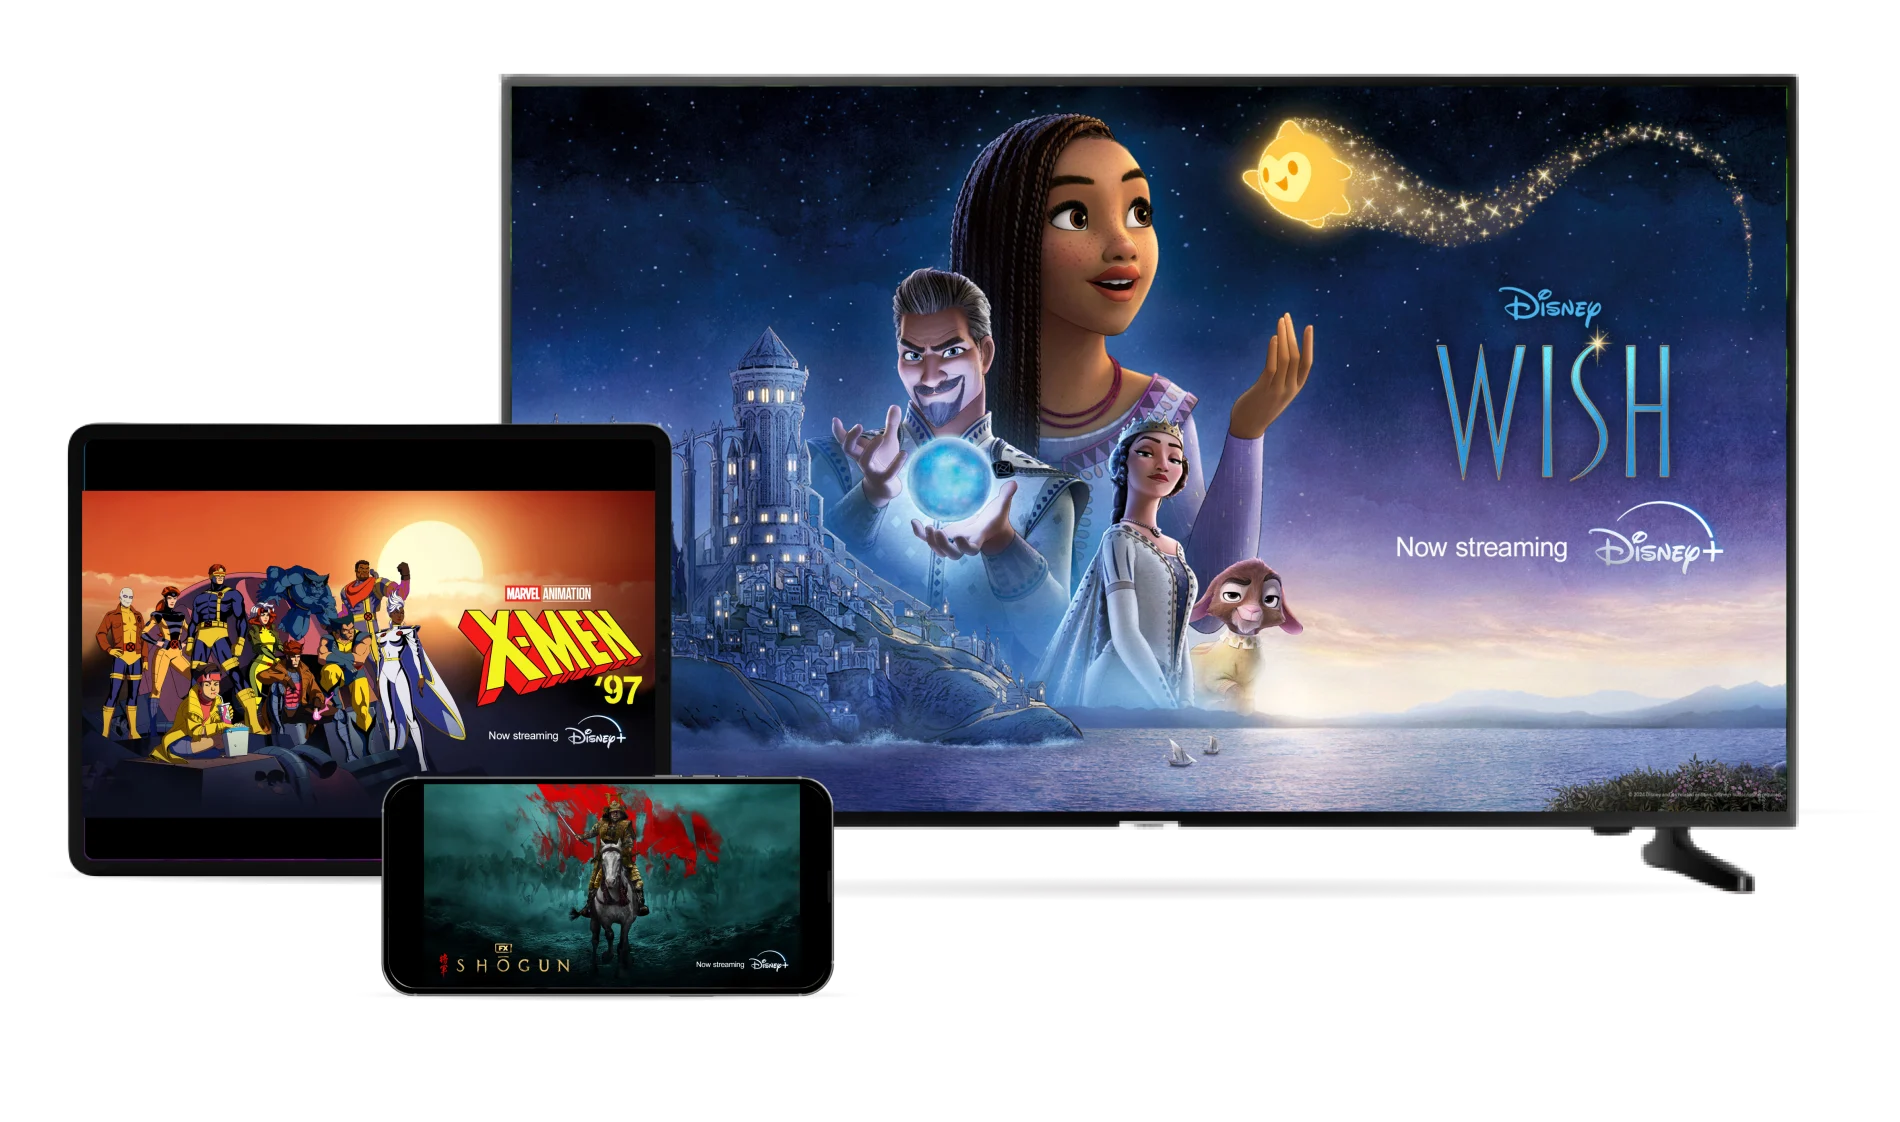 A smart TV, tablet and smartphone streaming popular Disney+ series and movies; Disney Wish, Marvel X-Men ‘97, and FX Shogun.